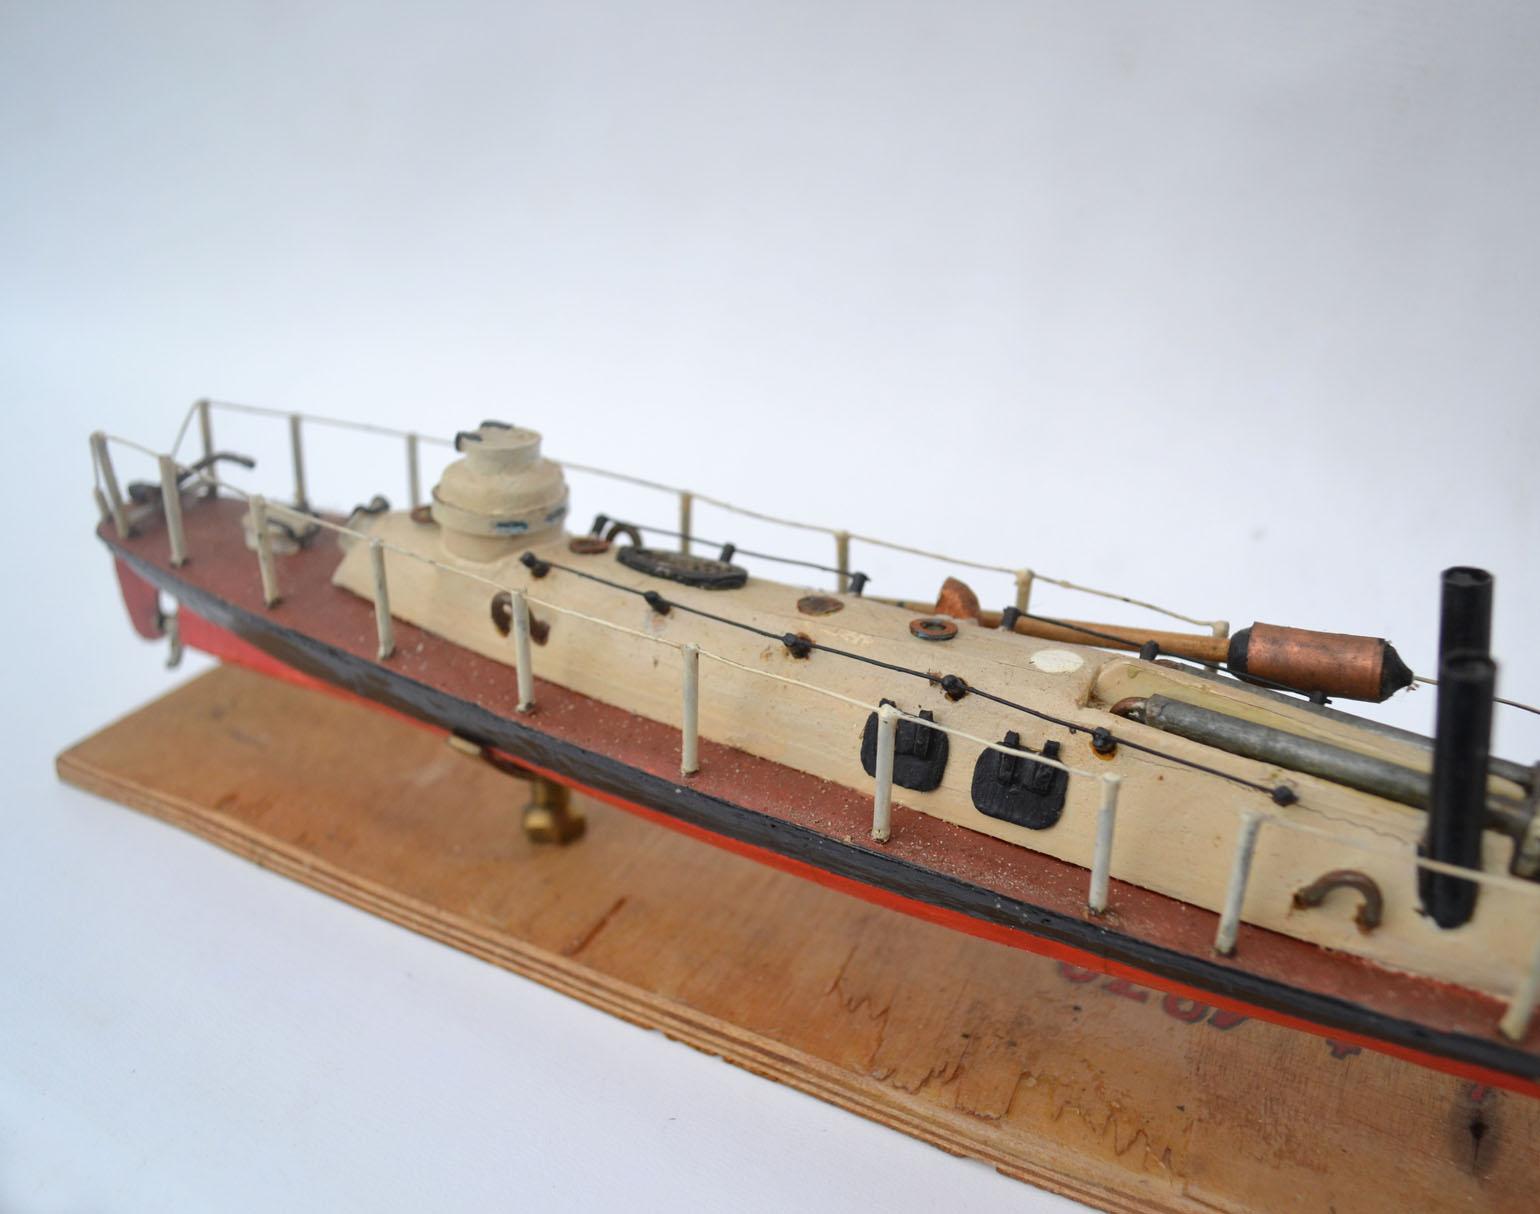 Model of an early torpedo ship was handcrafted between early to mid-20th century in Eastern Europe. This Torpedo boat is a relatively small and fast naval ship that was designed to carry torpedoes into battle. The yarrow torpedo boat was most likely